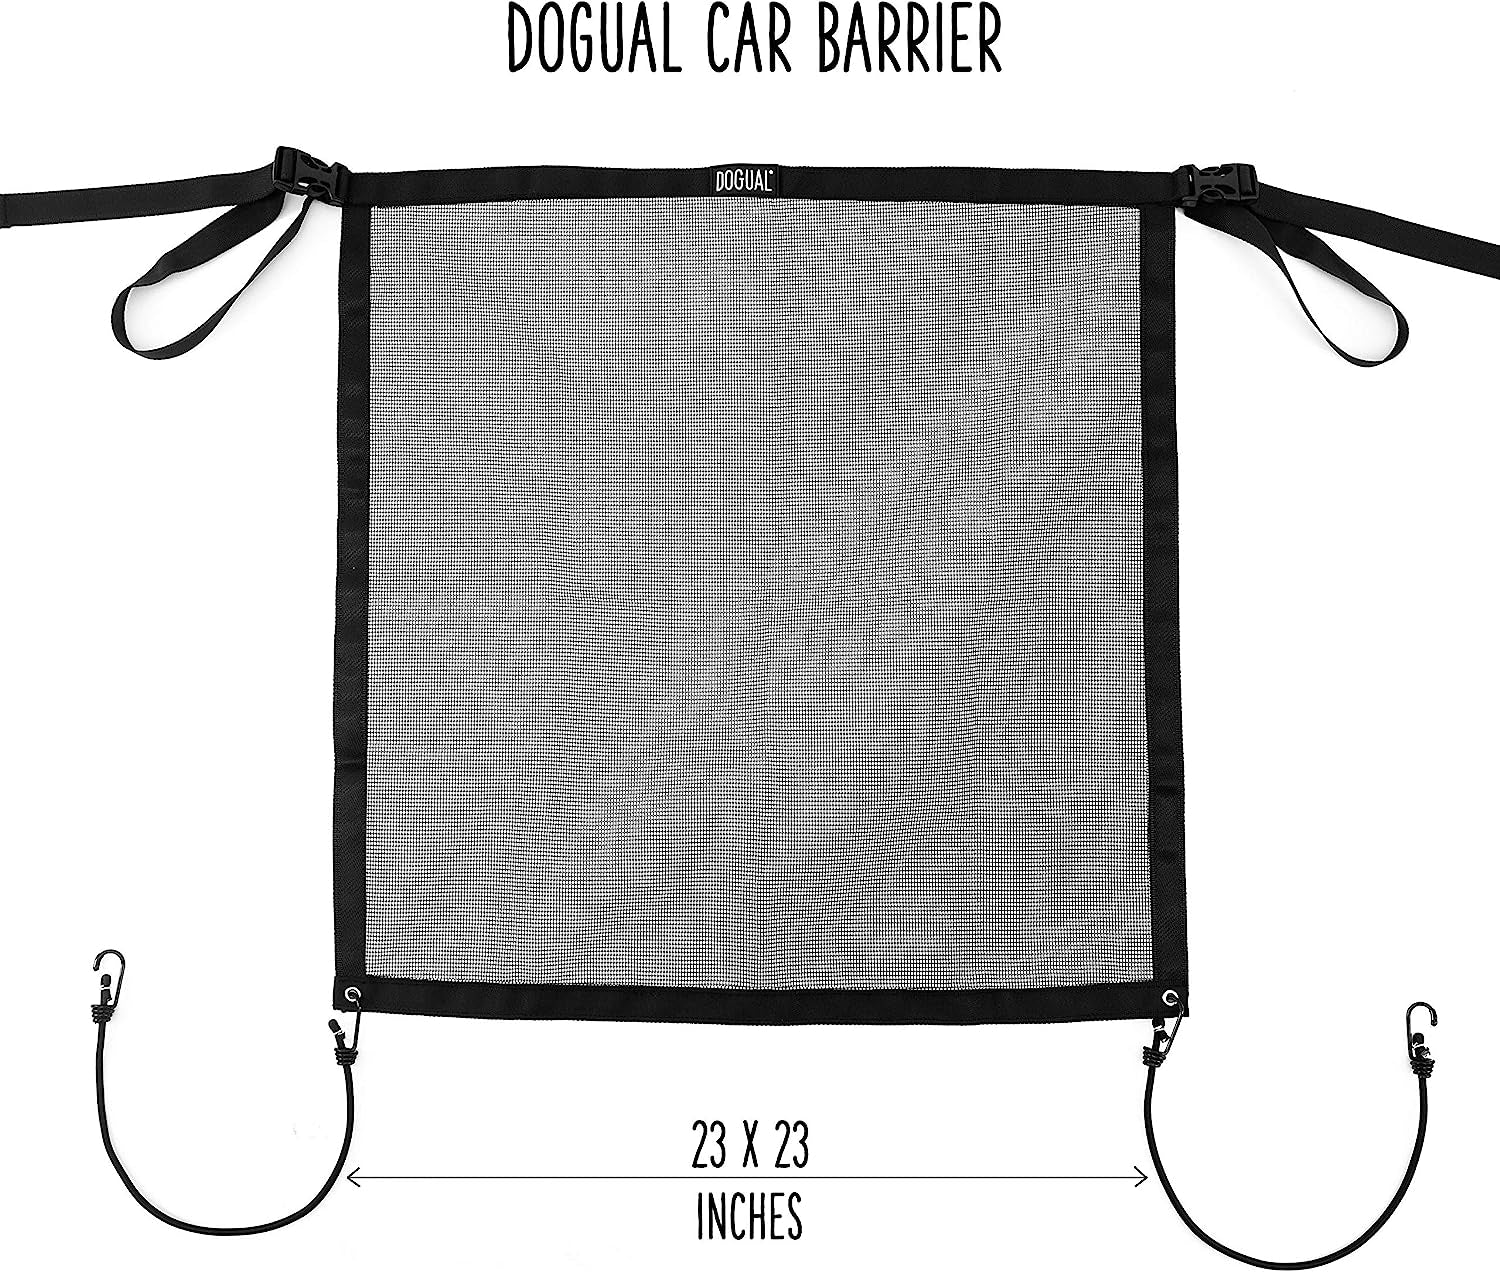 Universal Fit Dog Car Net Barrier: Sturdy Mesh, Easy to Install & Clean